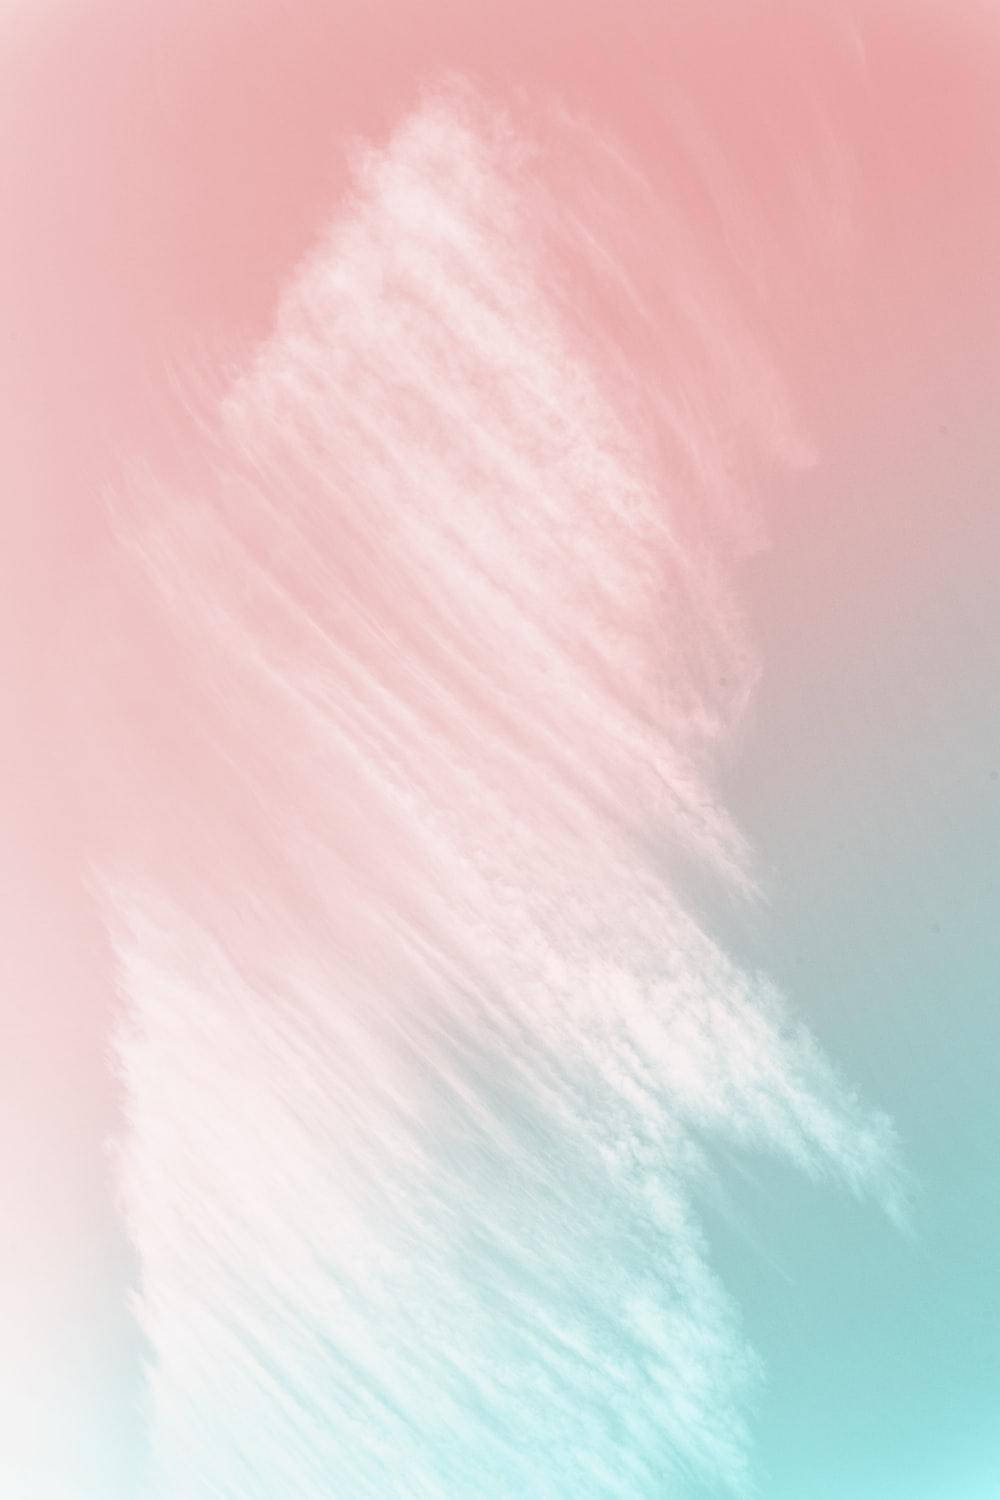 IPhone Pink Aesthetic Paint Strokes Wallpaper